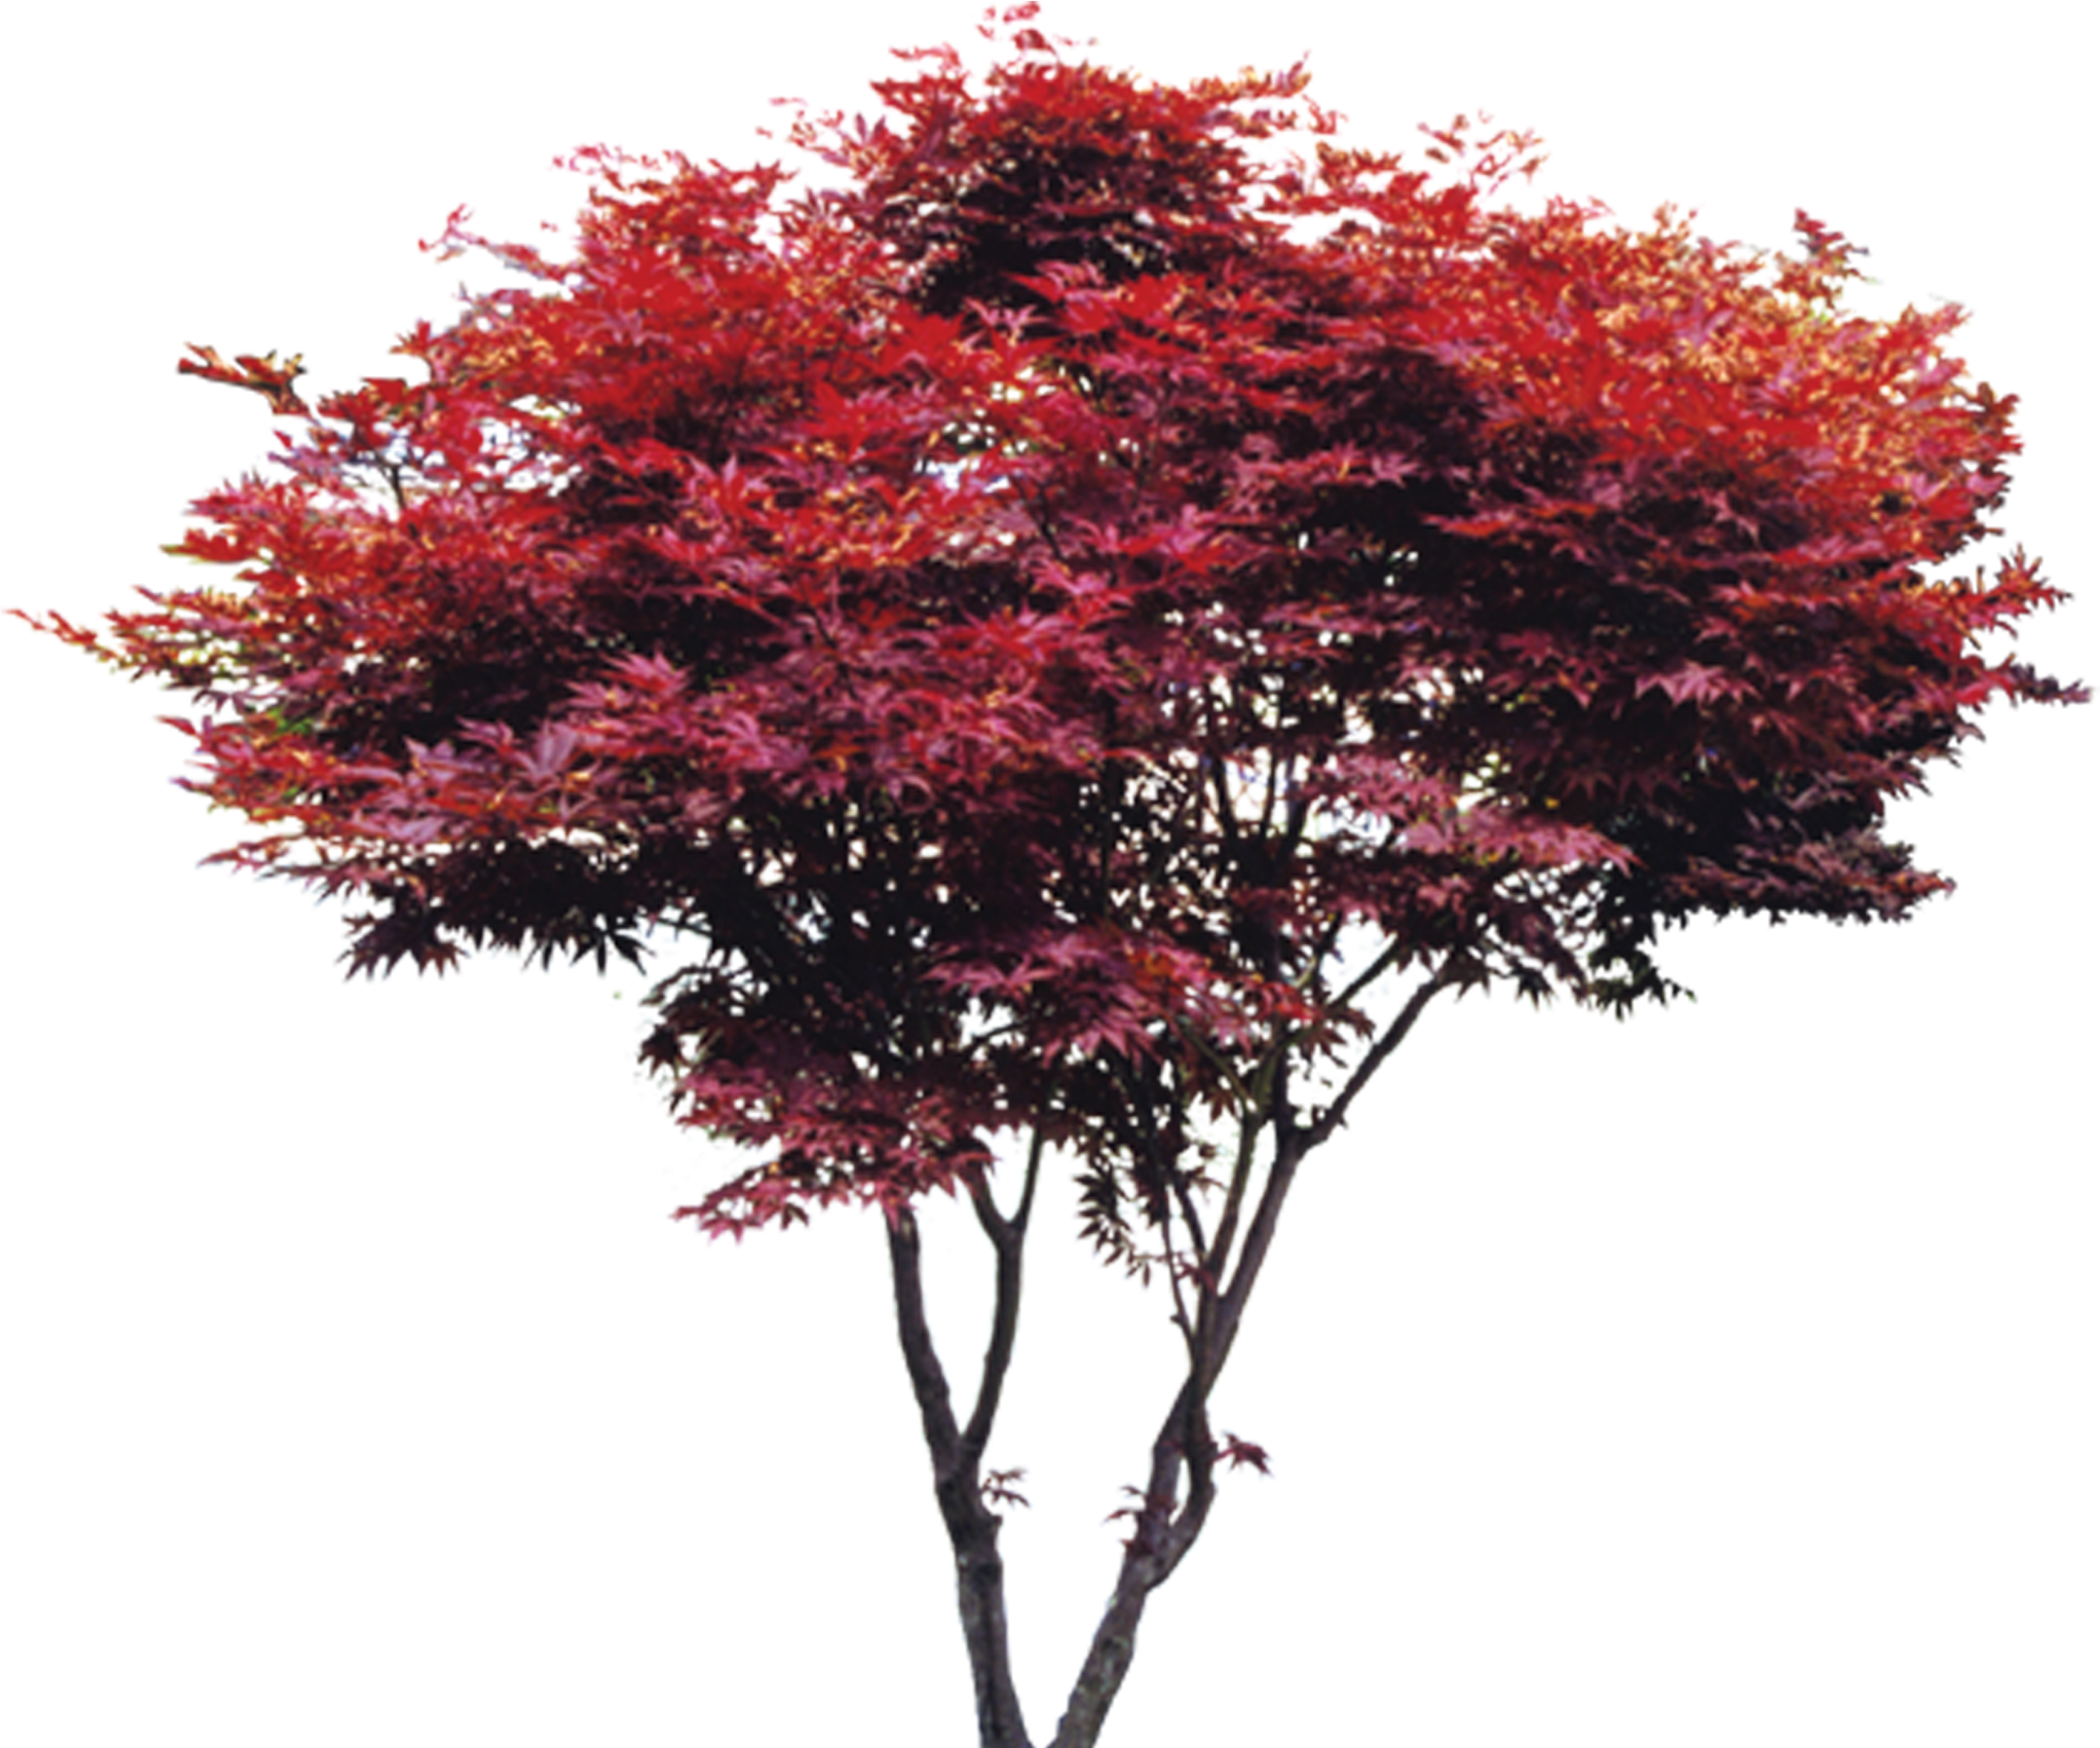 Tree Maple Red - Tree Maple Red (3172x2851)